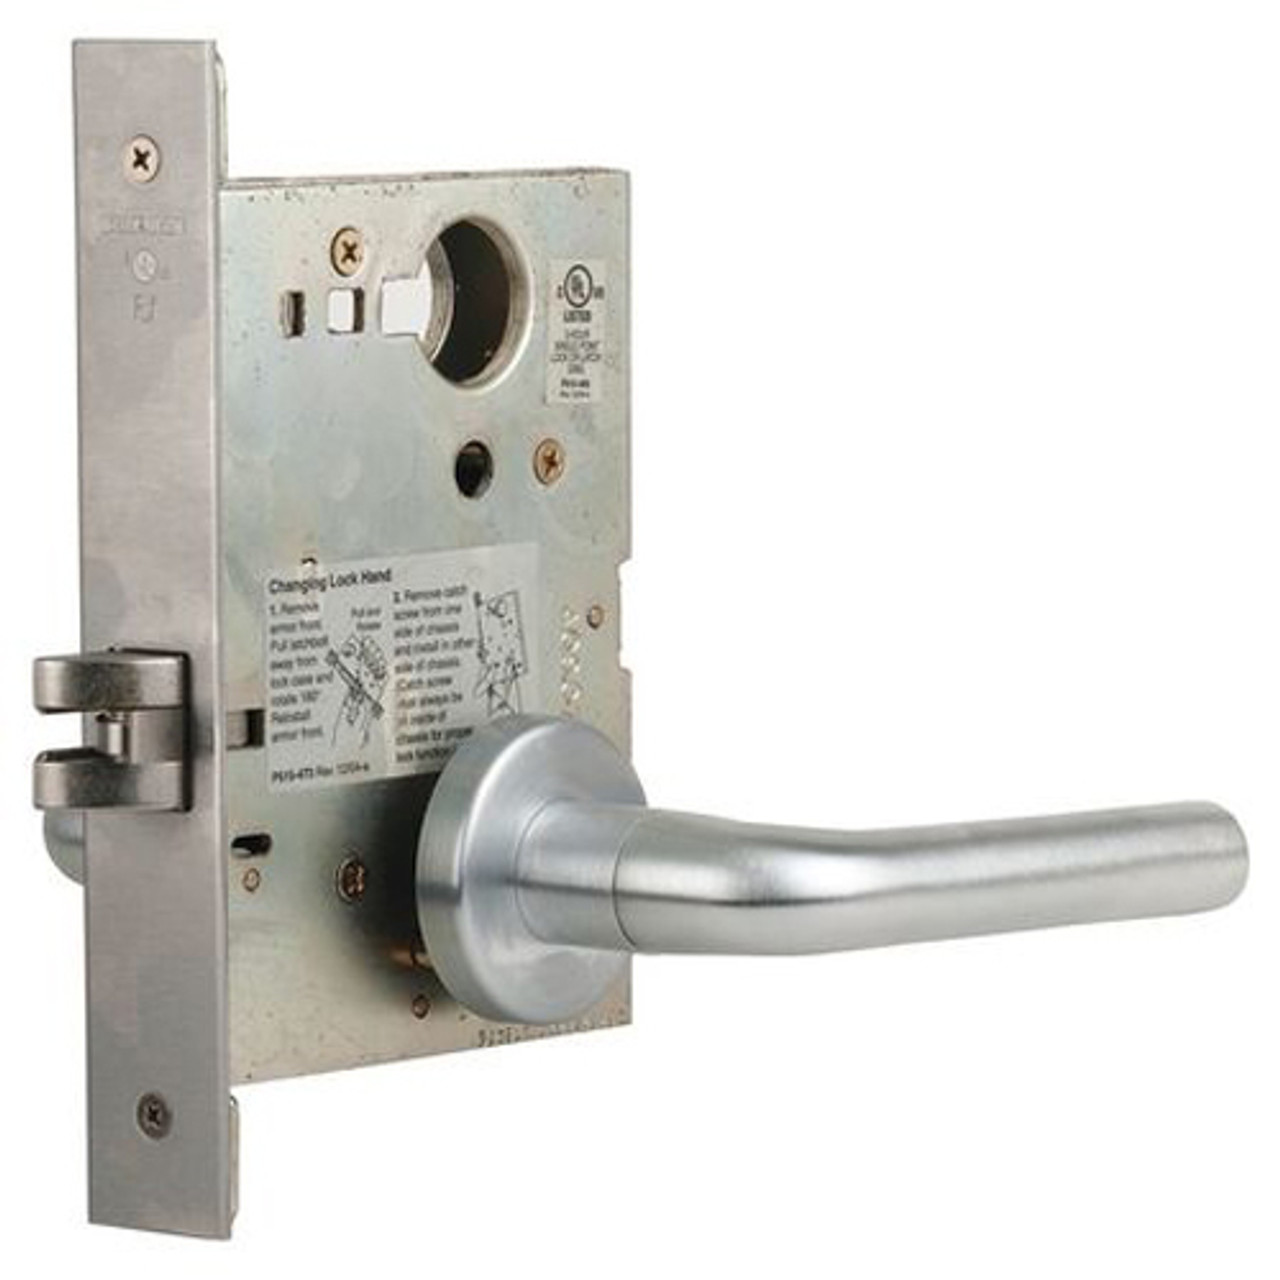 L9010-02B-626 Schlage L Series Passage Latch Commercial Mortise Lock with 02 Cast Lever Design in Satin Chrome